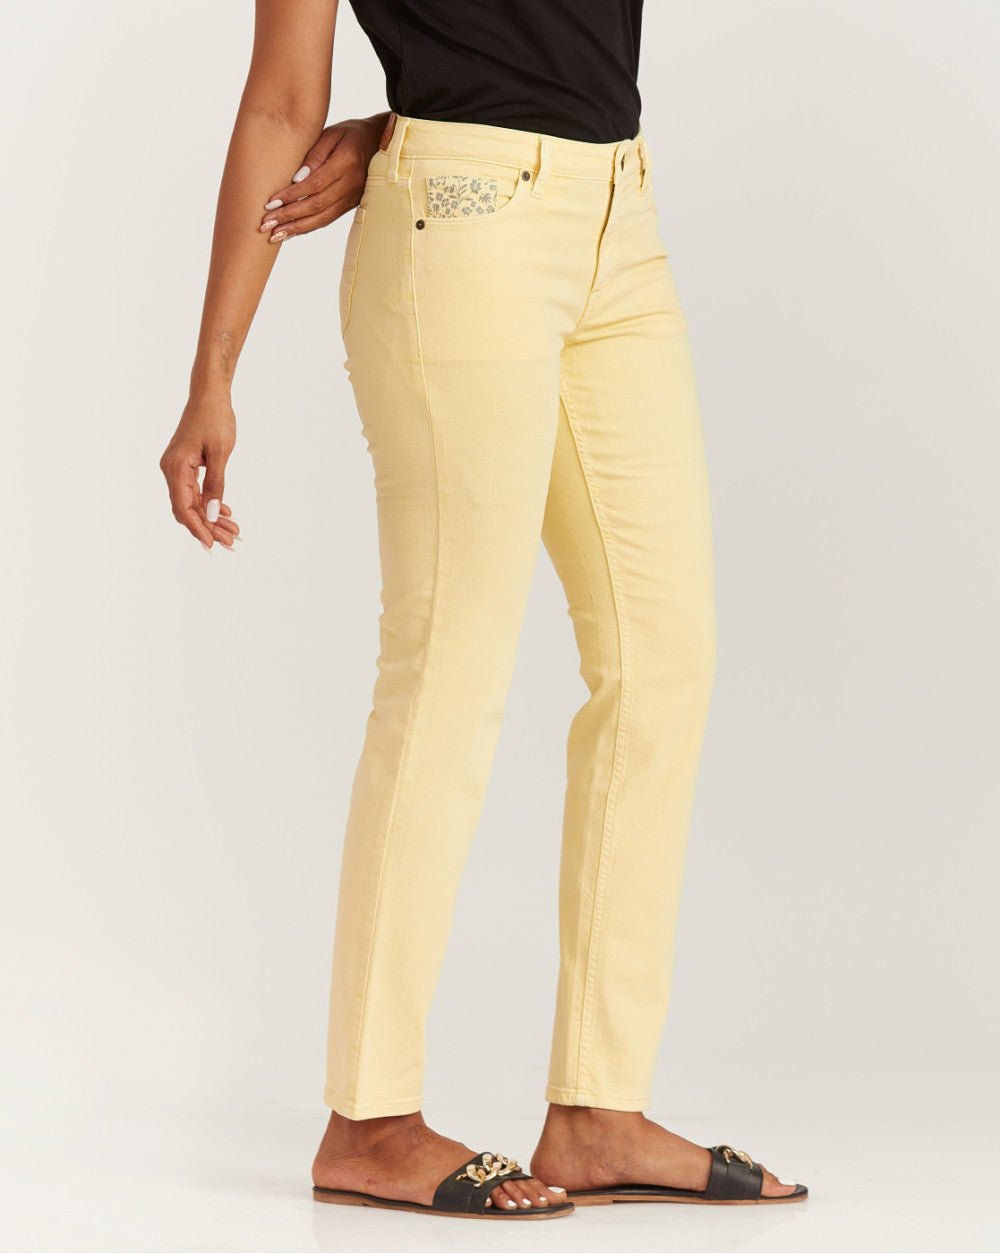 Slim Fit Mid Waist Colored Jeans - Daffodil Yellow